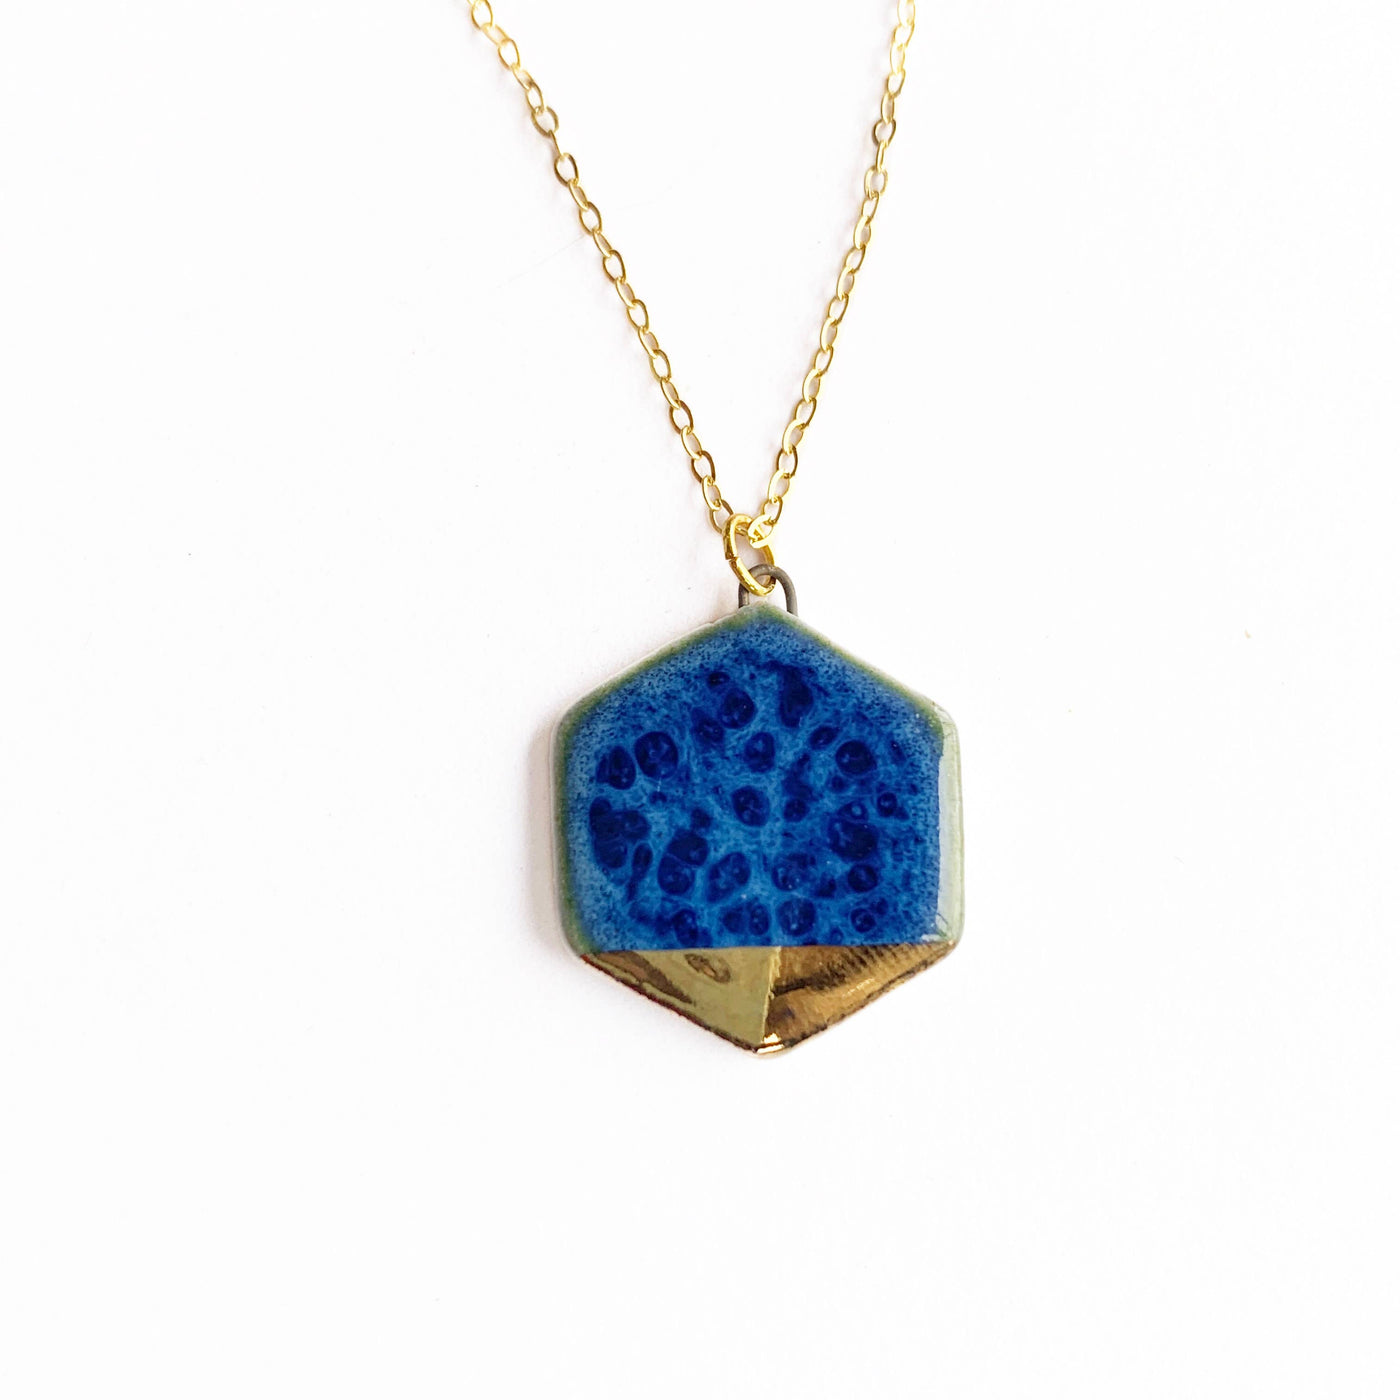 Necklace - Small Hexagon - Blue + Gold